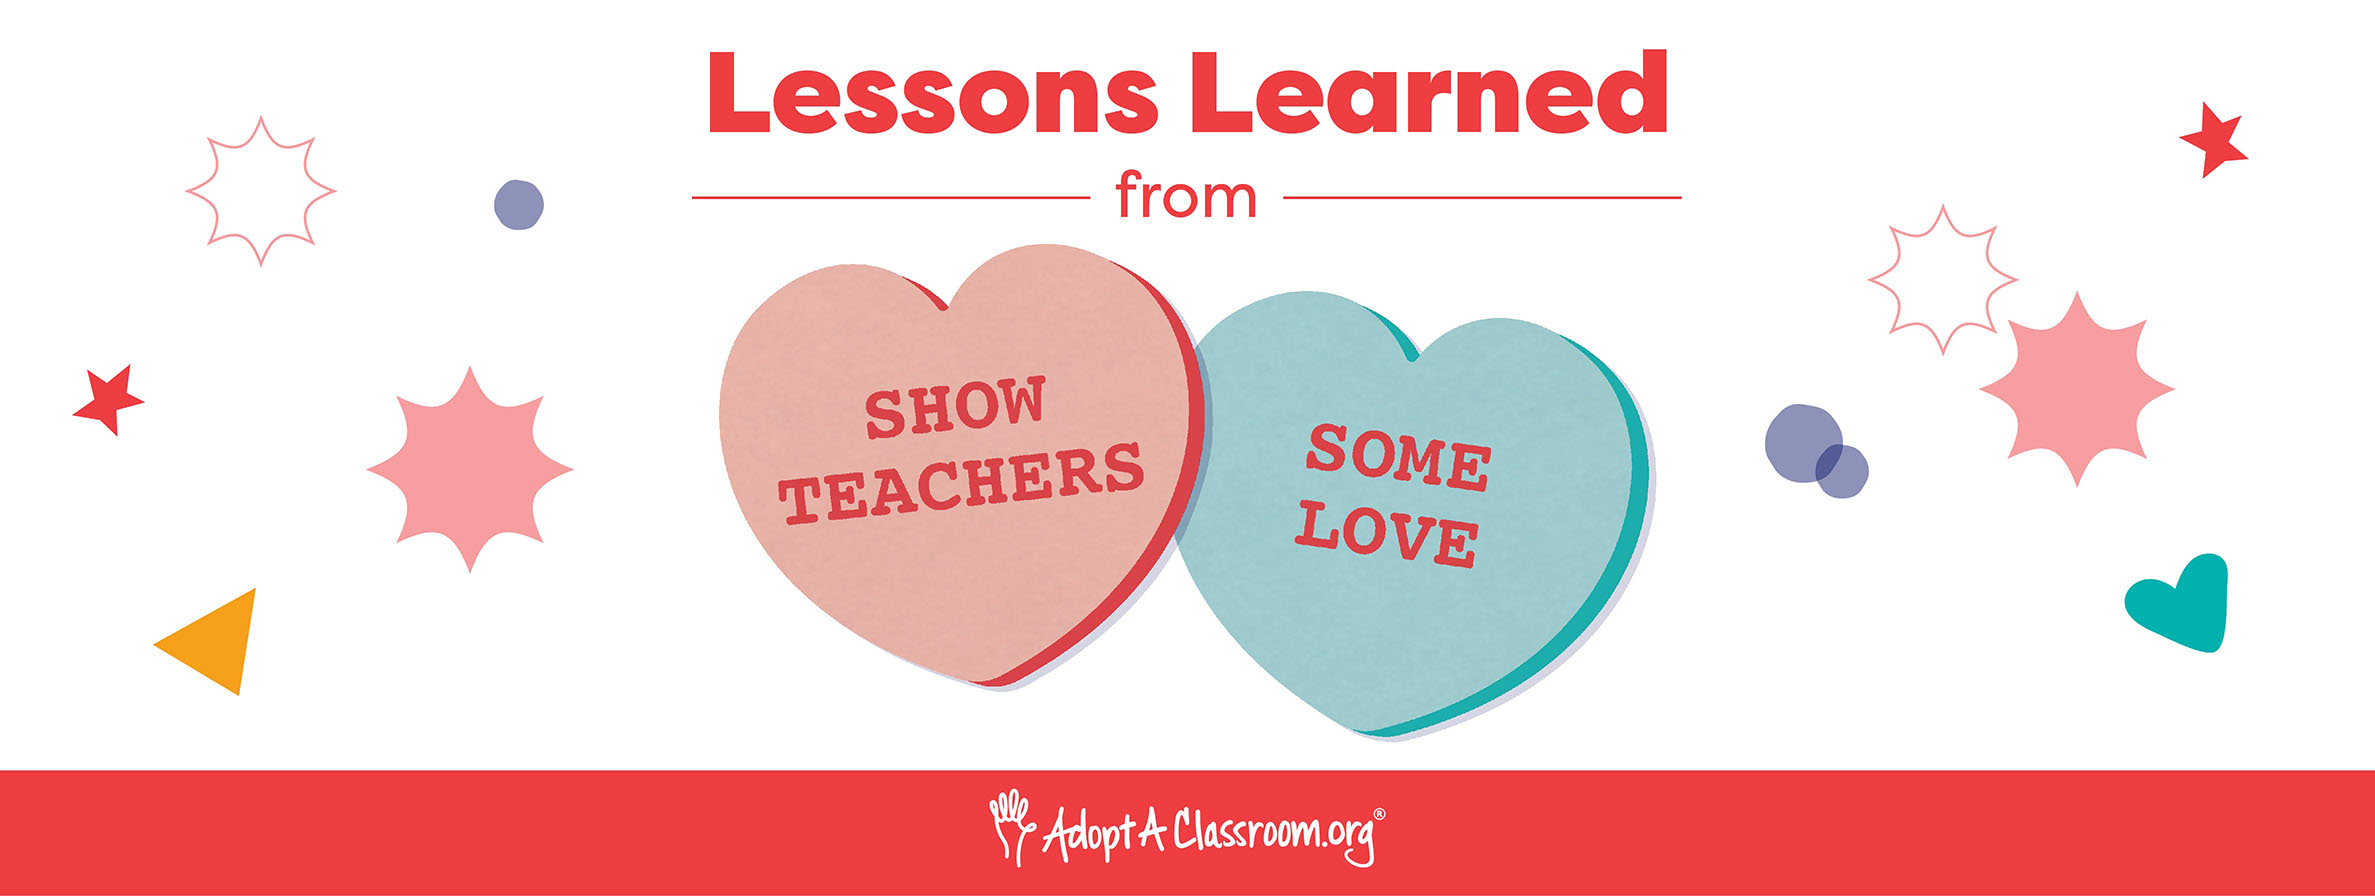 Lessons Learned from Show Teachers Some Love